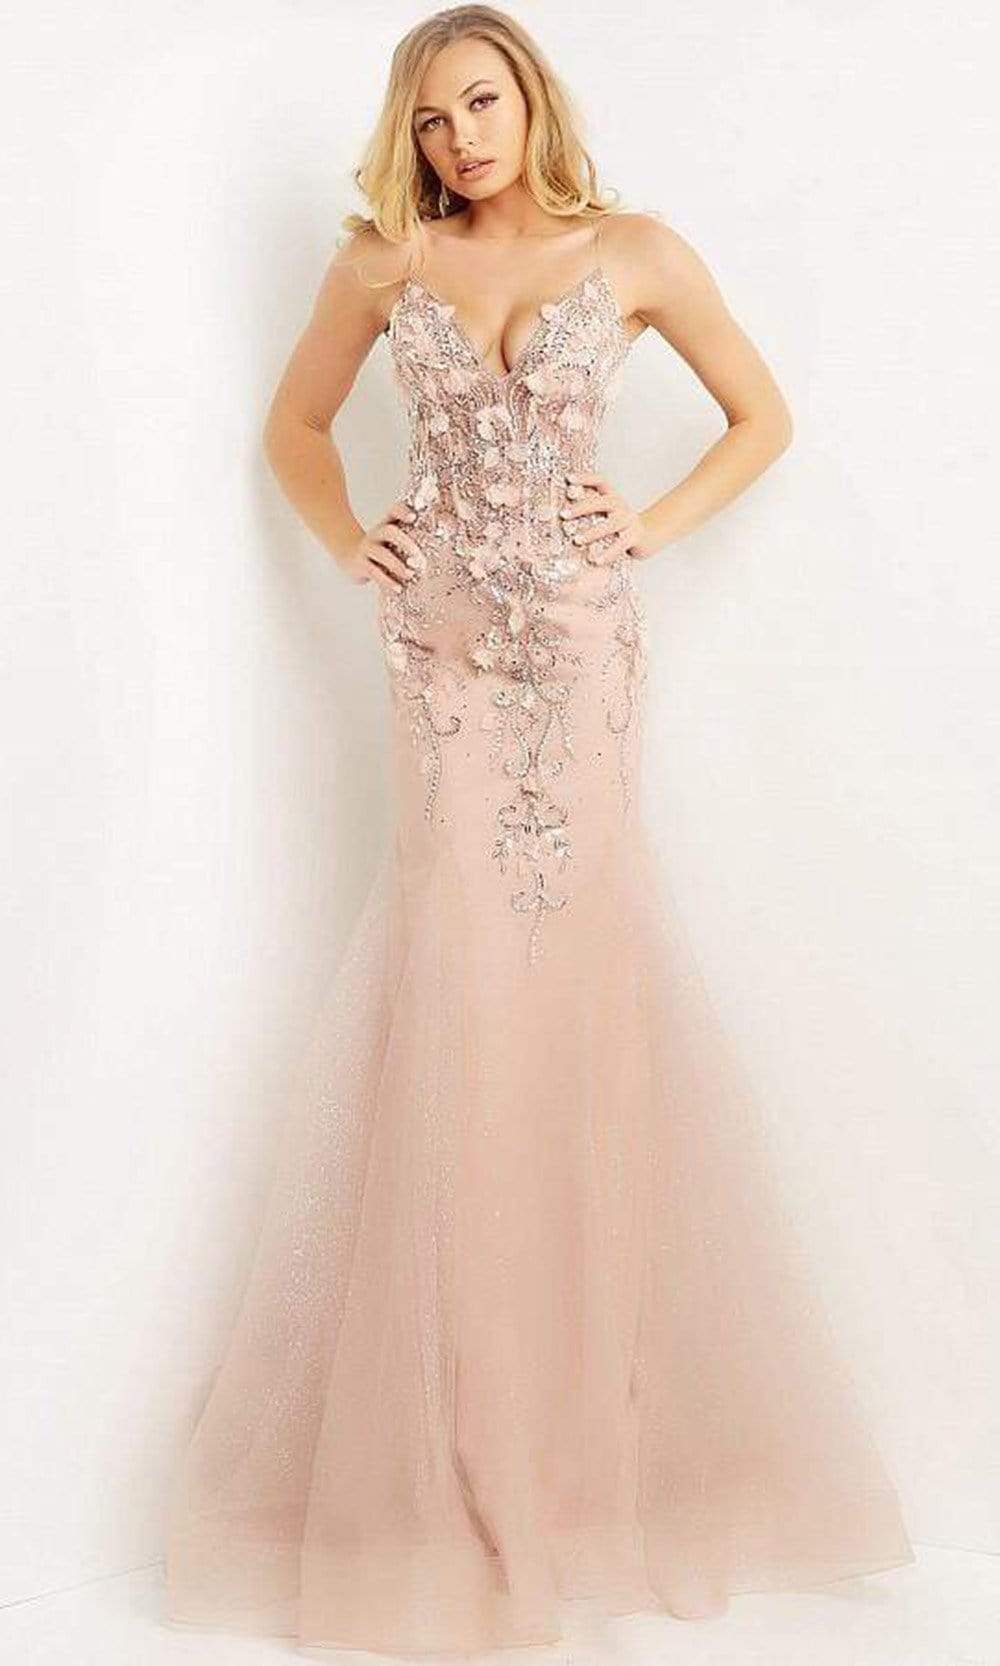 Jovani - 05839 Beaded Floral Applique Corset Bodice Mermaid Gown Special Occasion Dress 00 / Blush